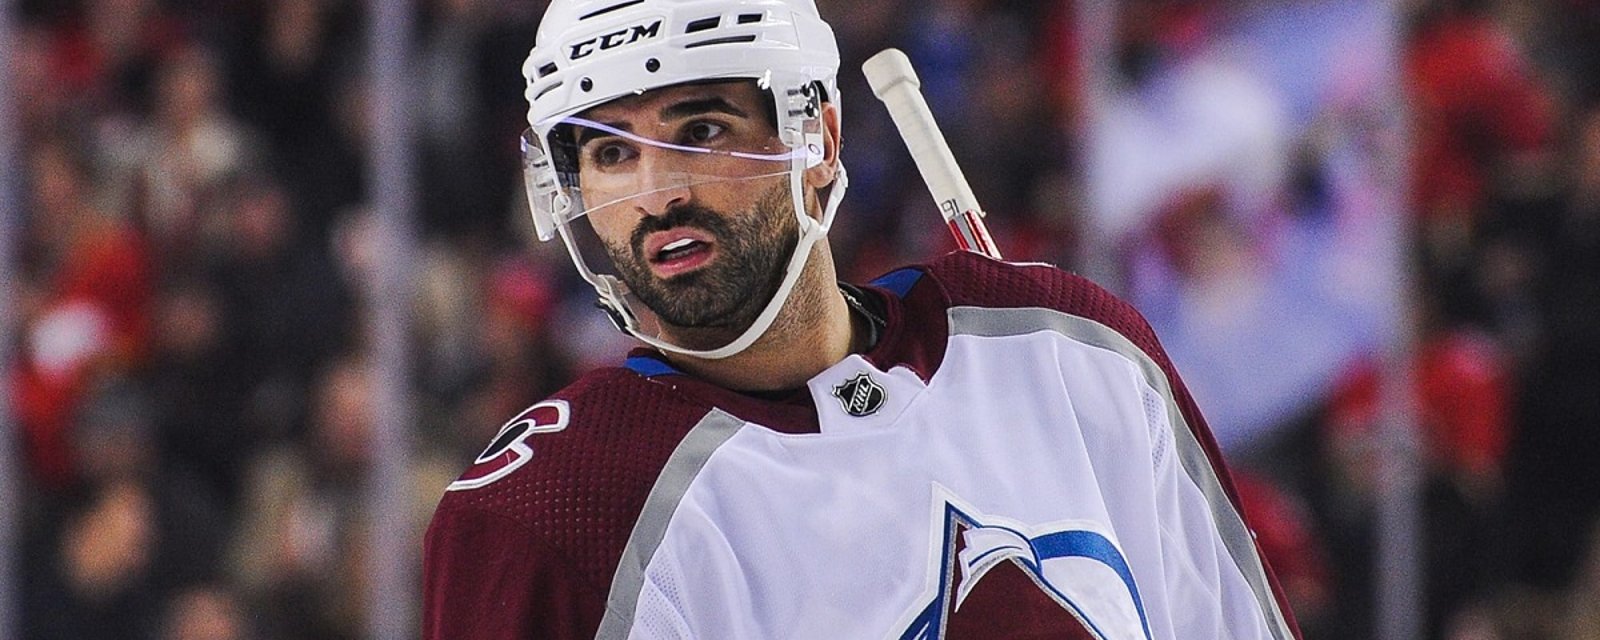 Rumor: Nazem Kadri's “stupid and goonish” behavior may have worn out his welcome in Colorado.